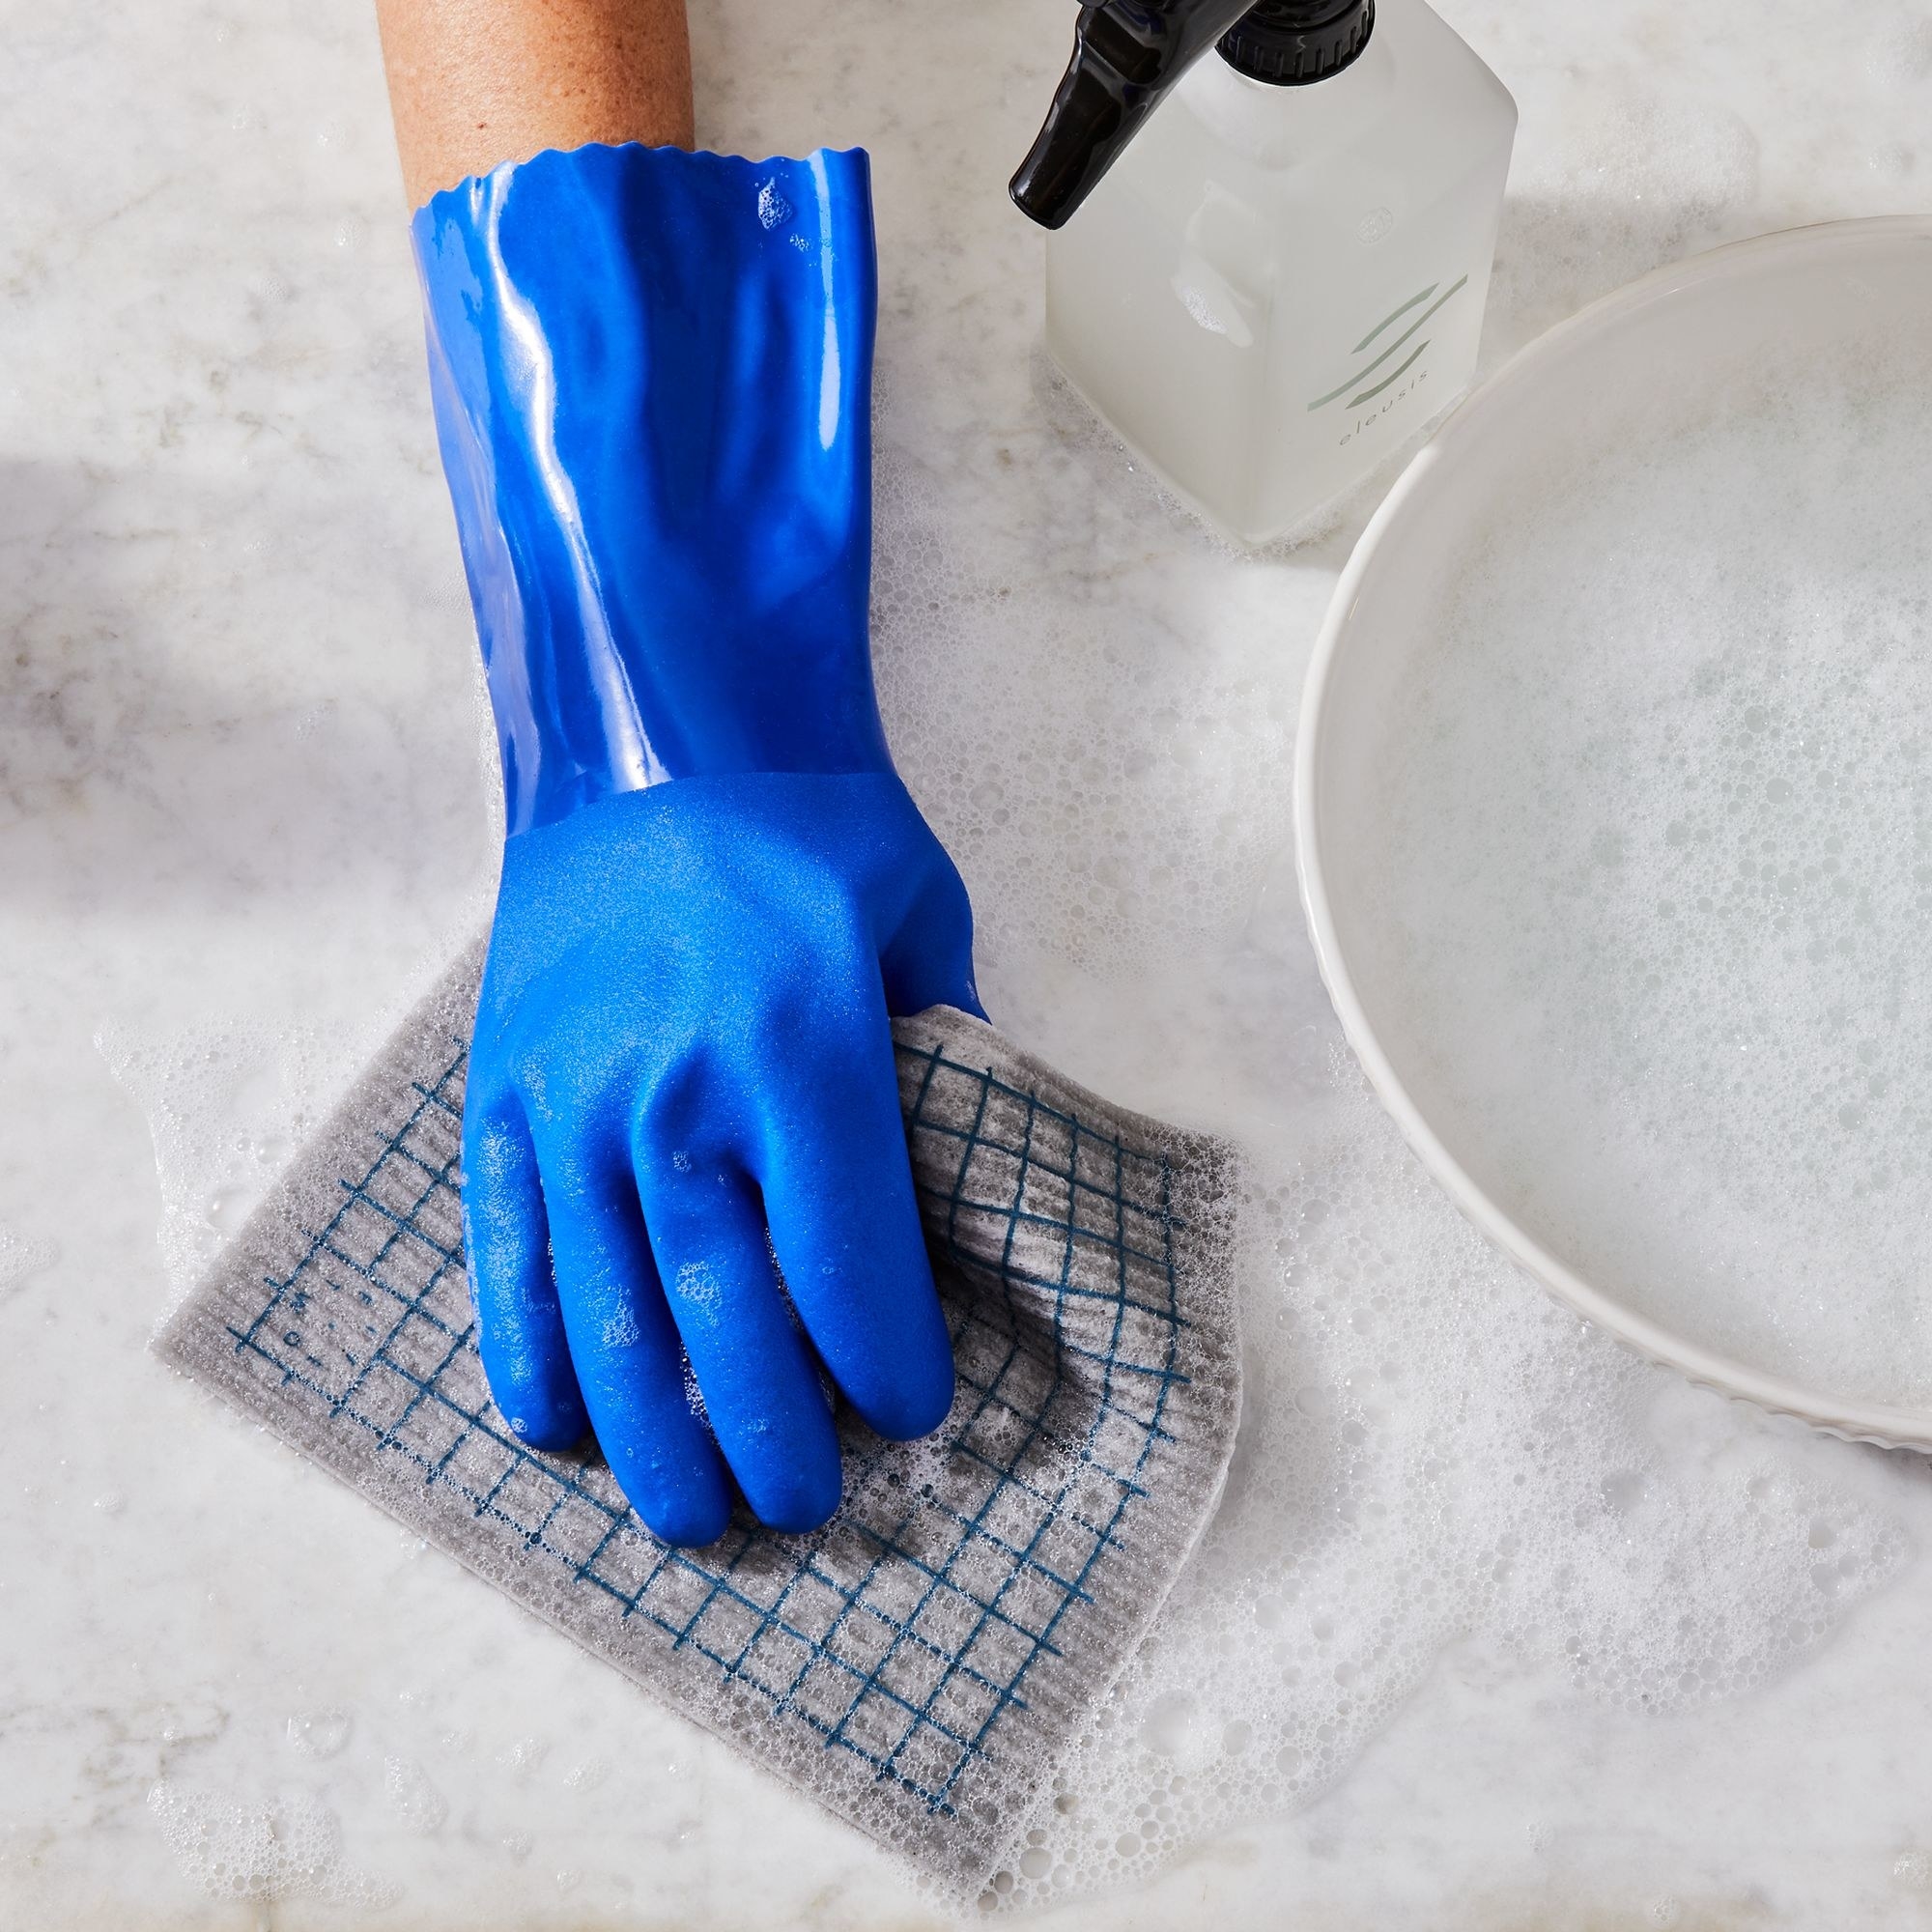 14 Gifts for People Who Love to Clean